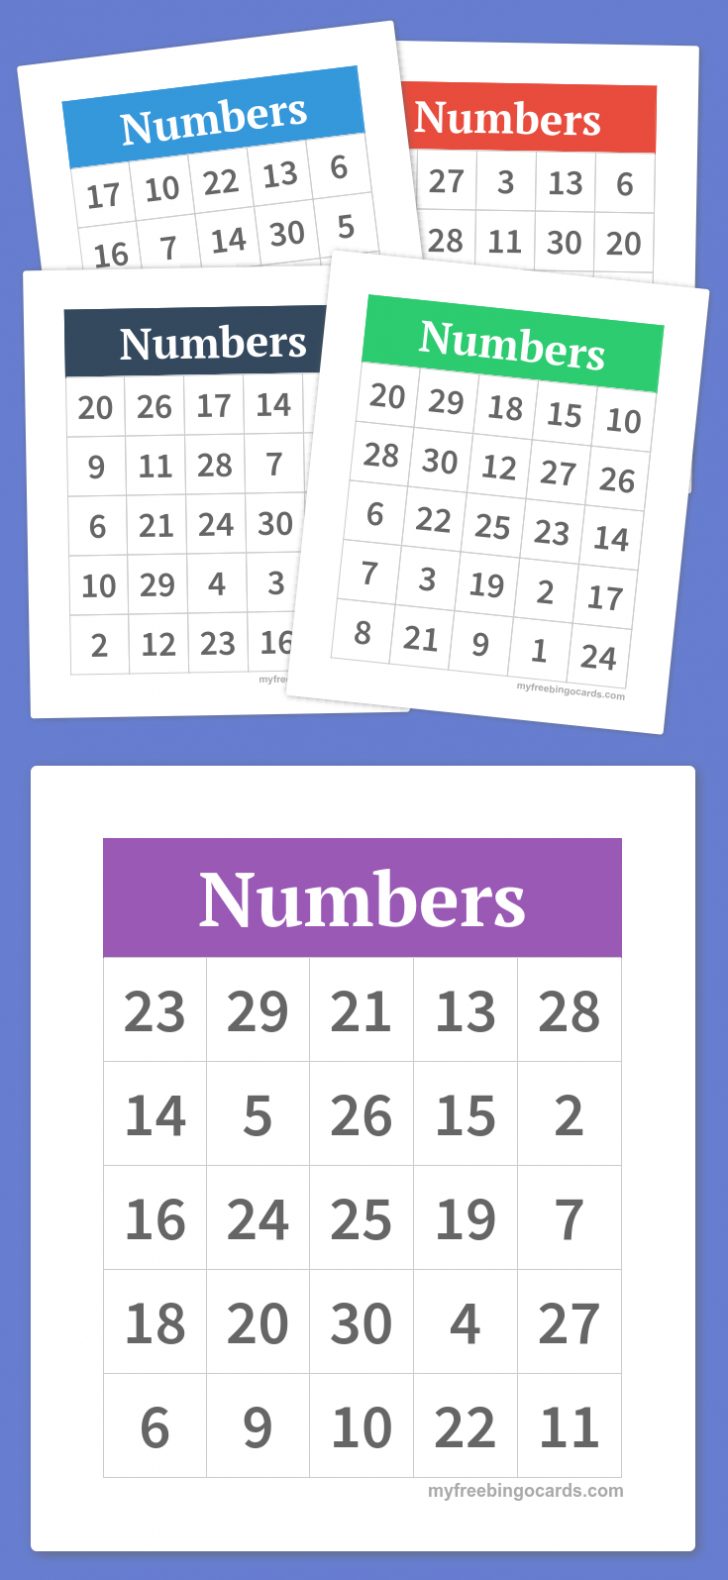 Printable Bingo Cards With Numbers 1-75